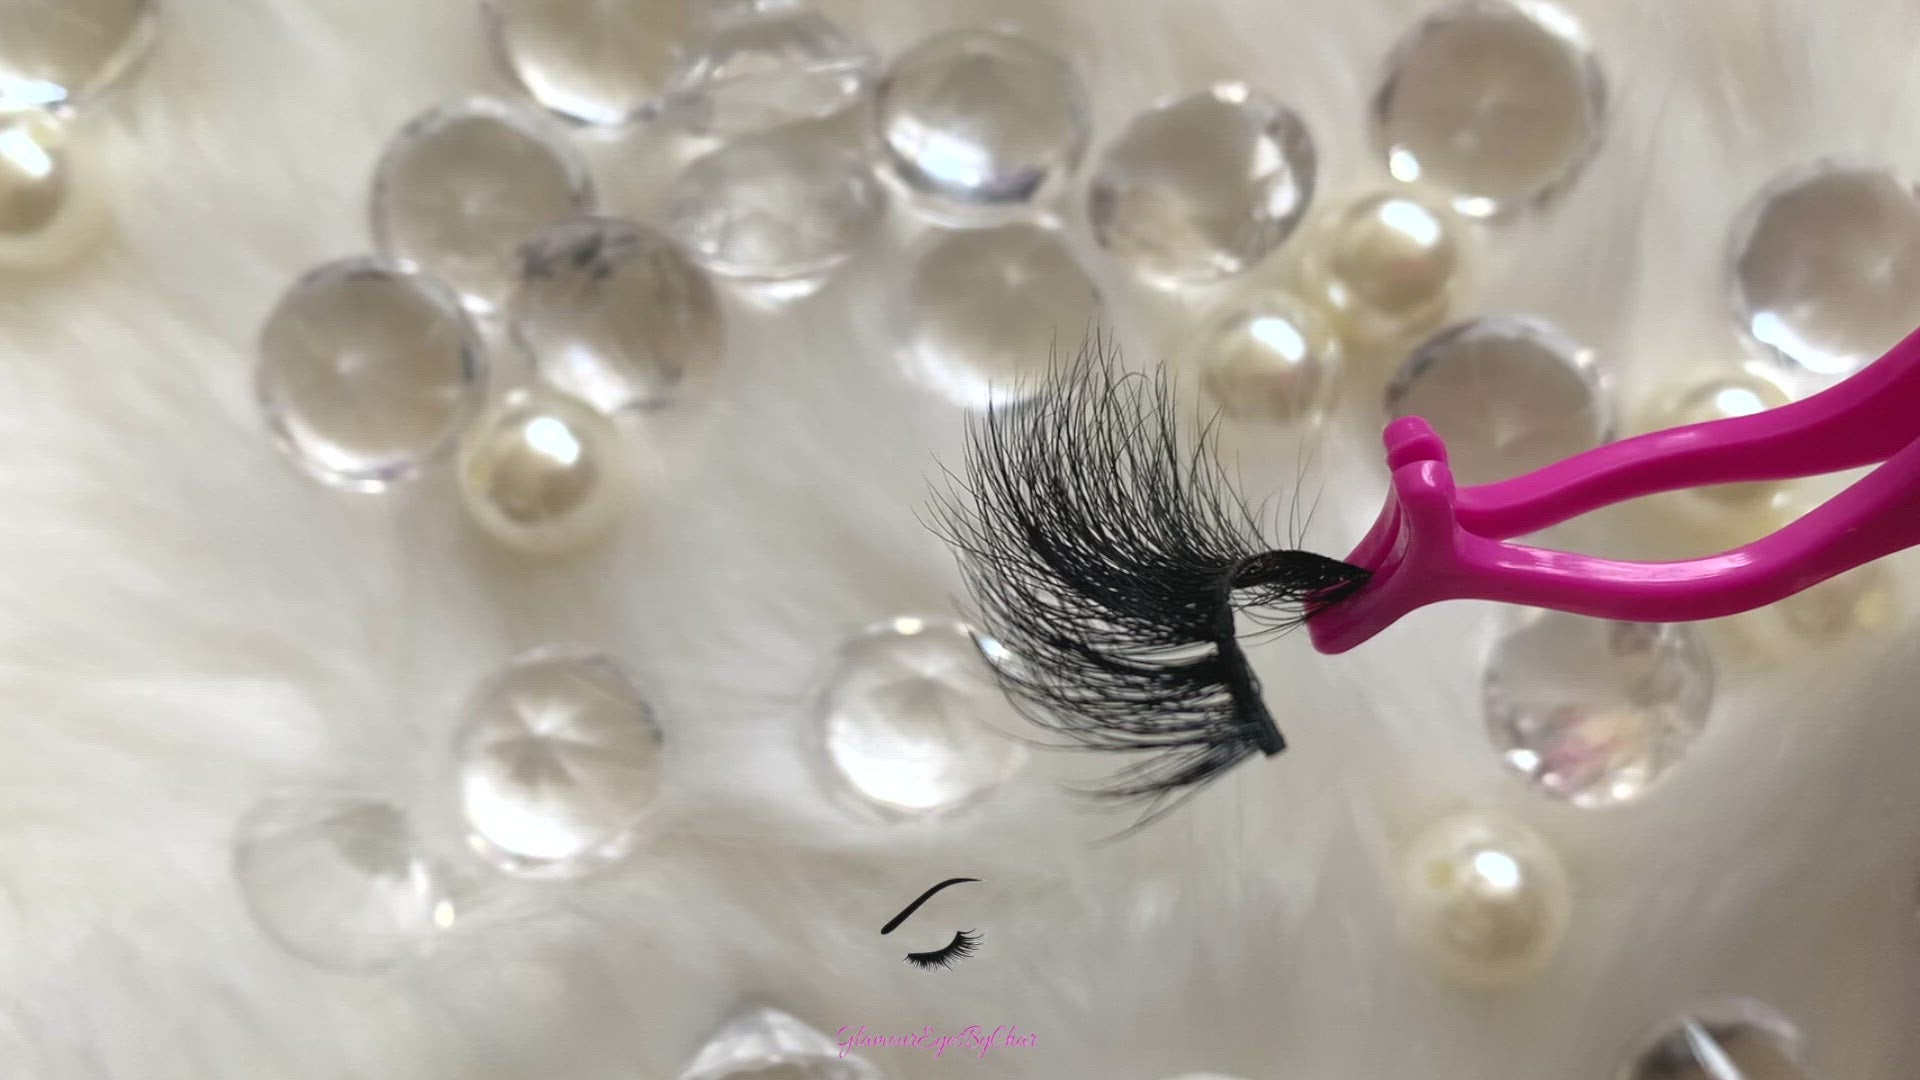 These 3D luxurious mink lashes are called Jakki and are 15-18mm in length. They are light and fluffy, and very comfortable to wear on the lids. The thin lashband, makes the application process a breeze. Jakki are suitable for everyday wear and can be worn up to 25 times if handled with care. 